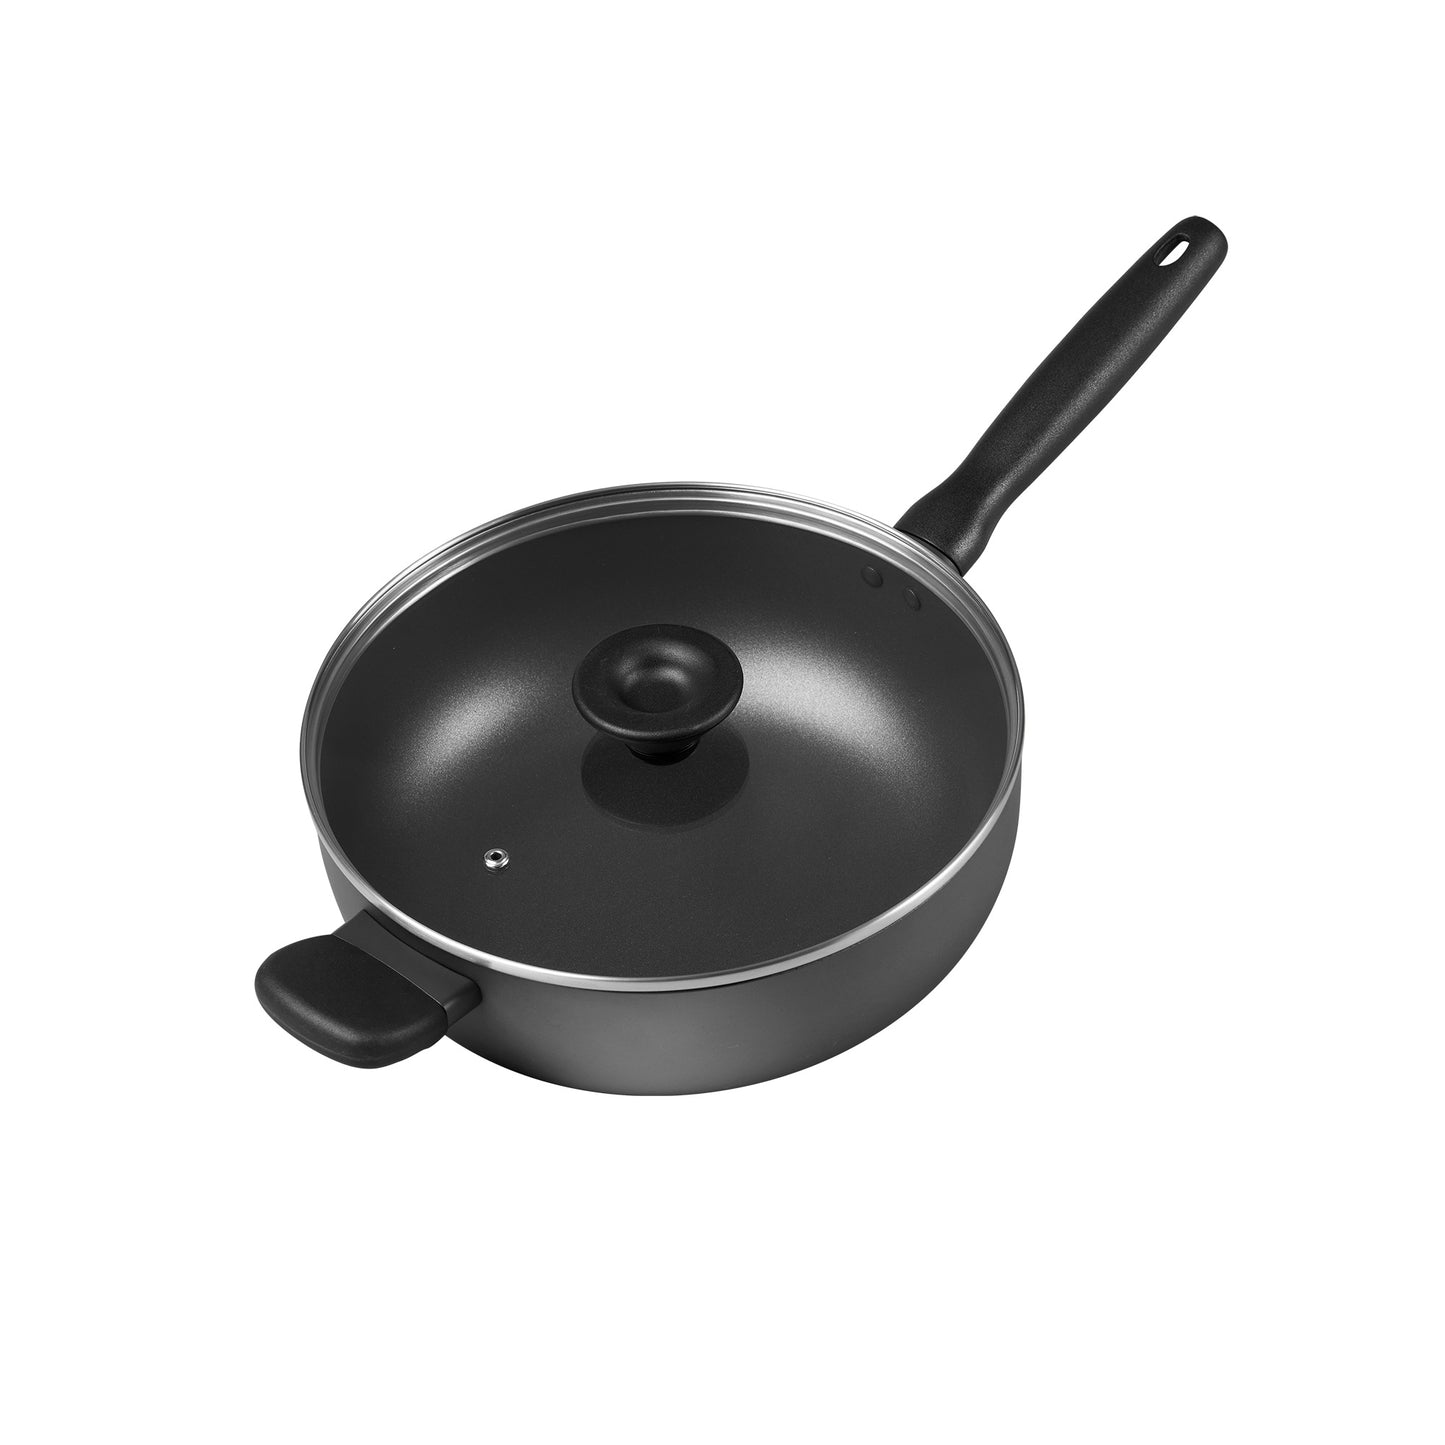 Meyer Bauhaus Series Nonstick Induction Chef's Pan with Glass Lid 26cm